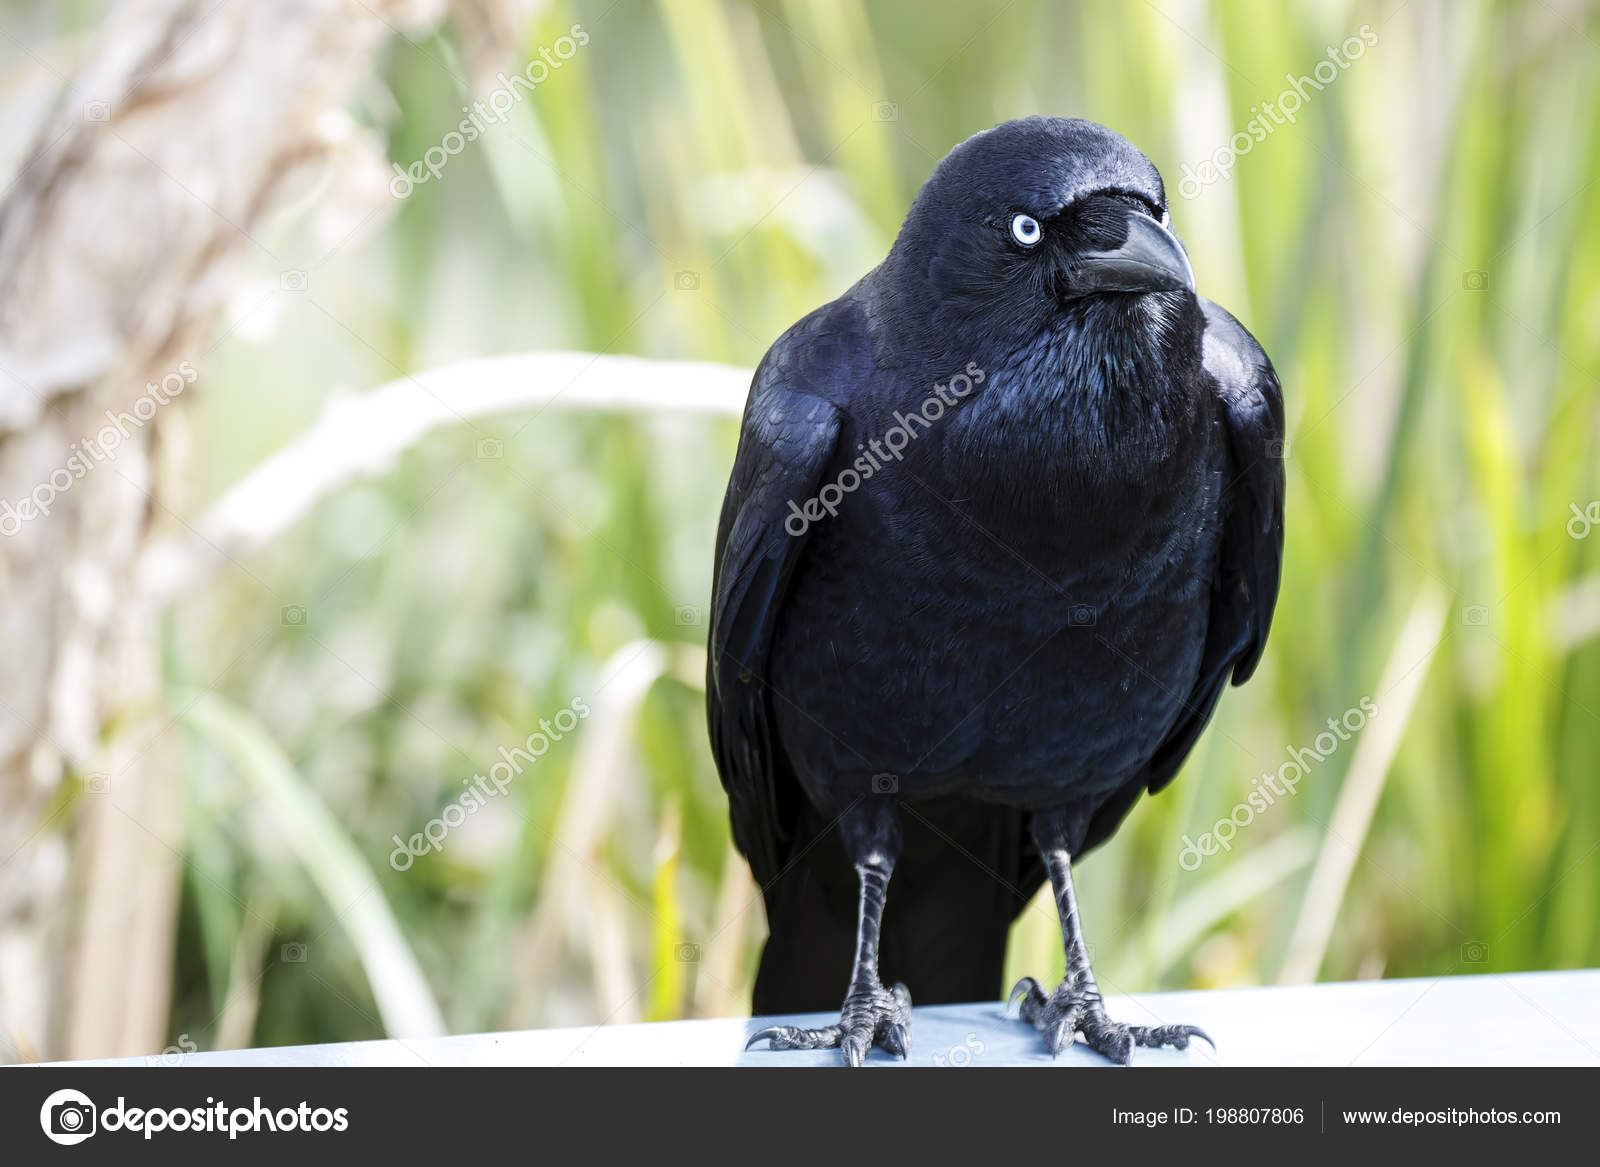 Funny crow Stock Photos, Royalty Free Funny crow Images | Depositphotos